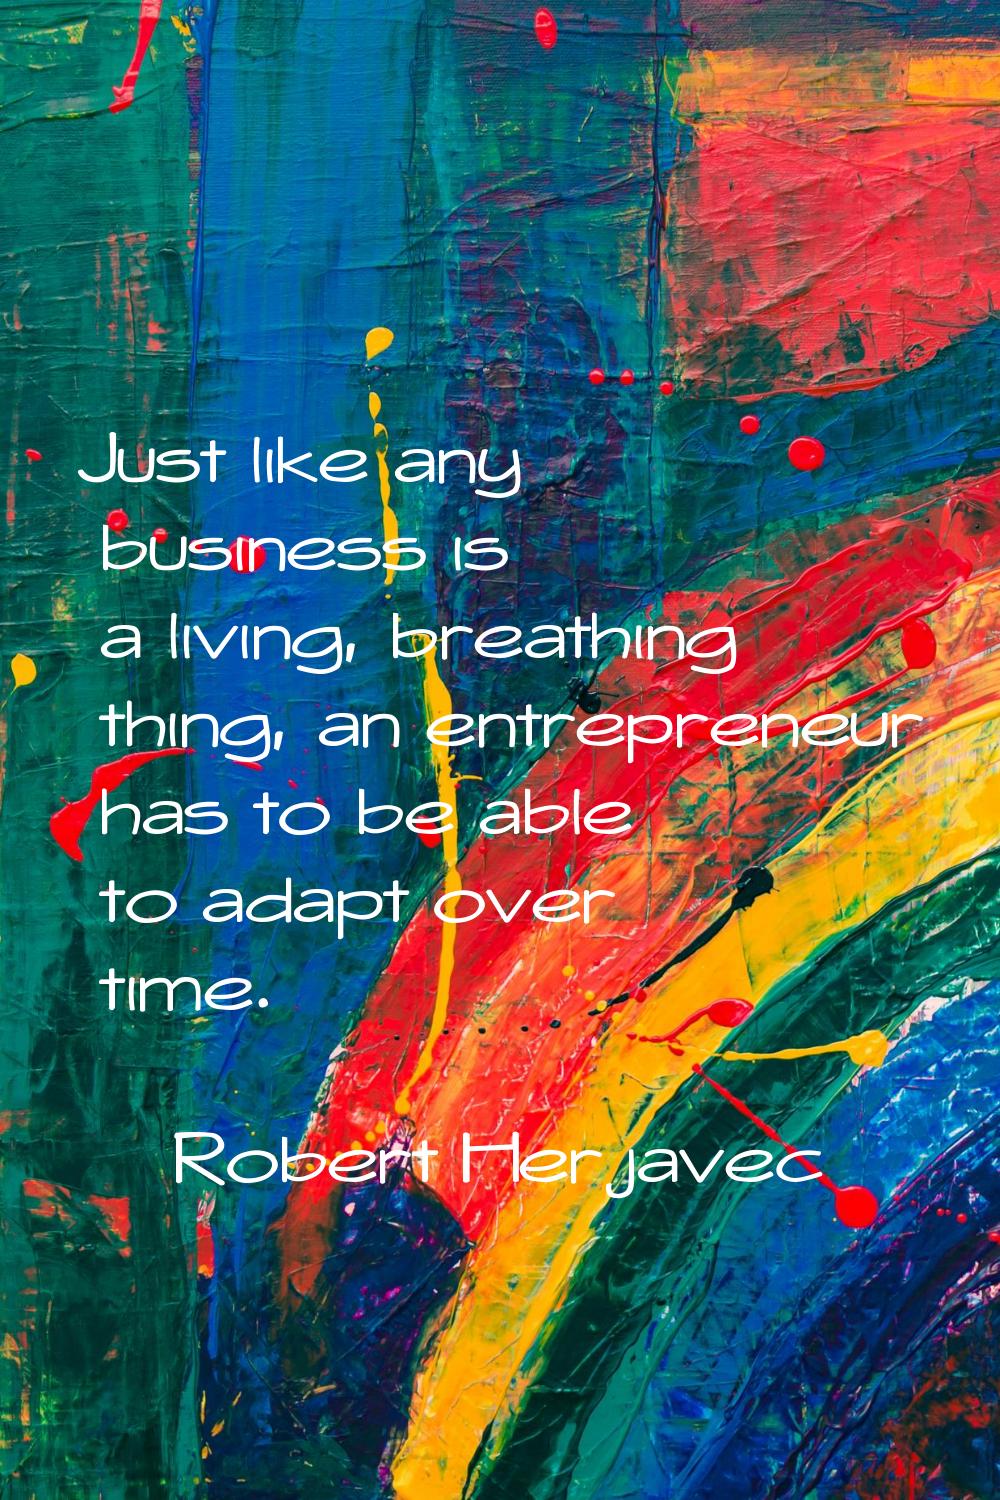 Just like any business is a living, breathing thing, an entrepreneur has to be able to adapt over t